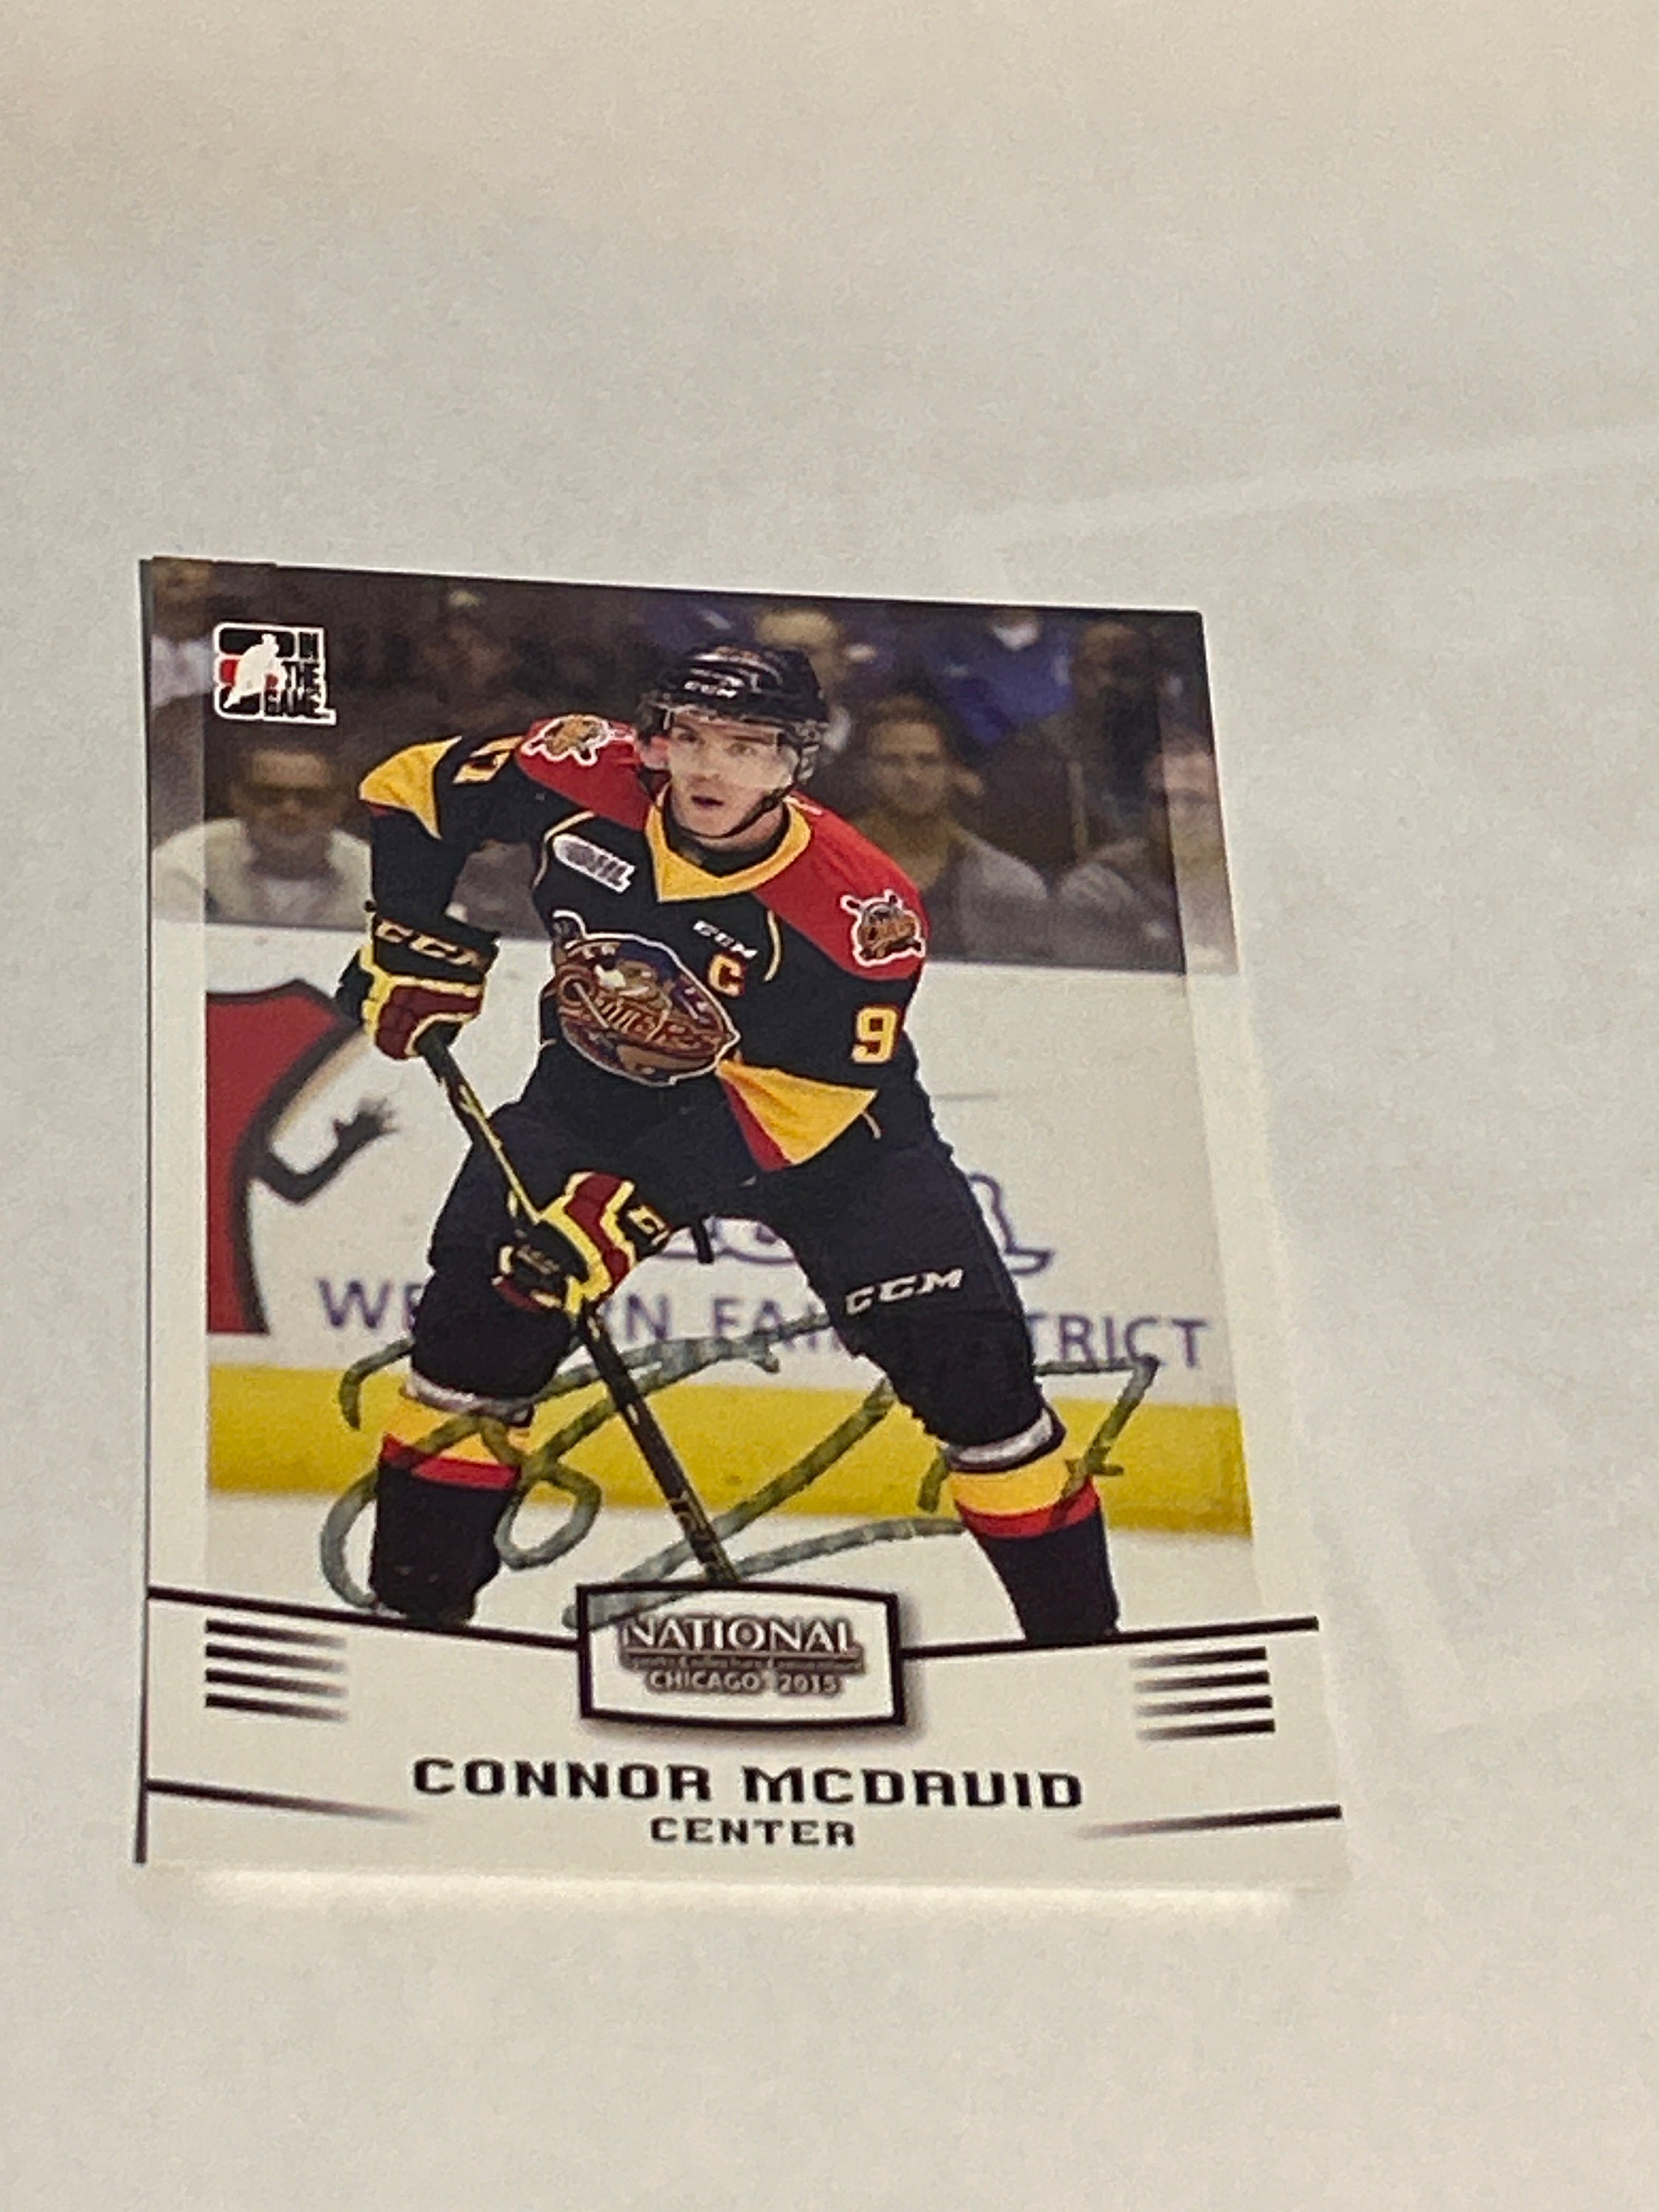 Best Connor Mcdavid Erie Otters Graded Hockey Card Mint for sale